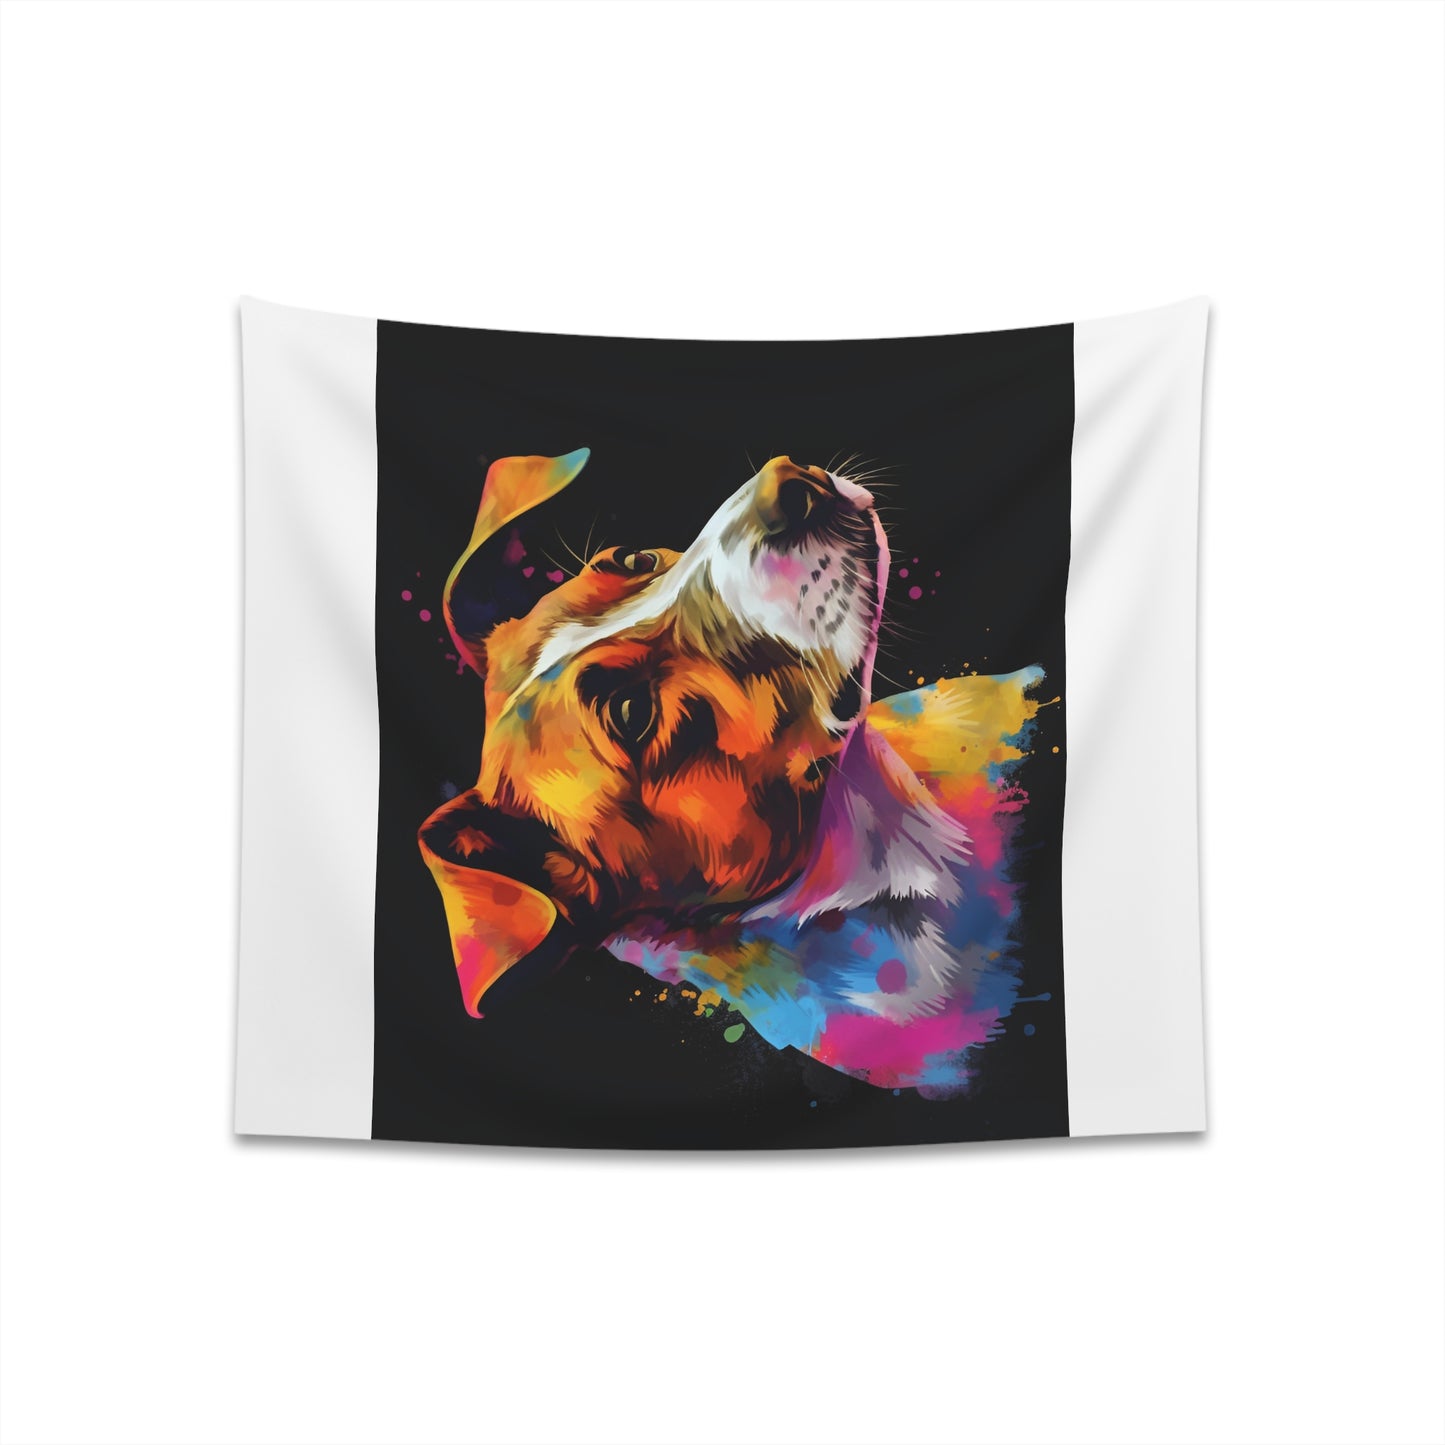 "Jack Russell Joy Tapestry: Celebrate Playful Energy with High-Quality and Stylish Design"